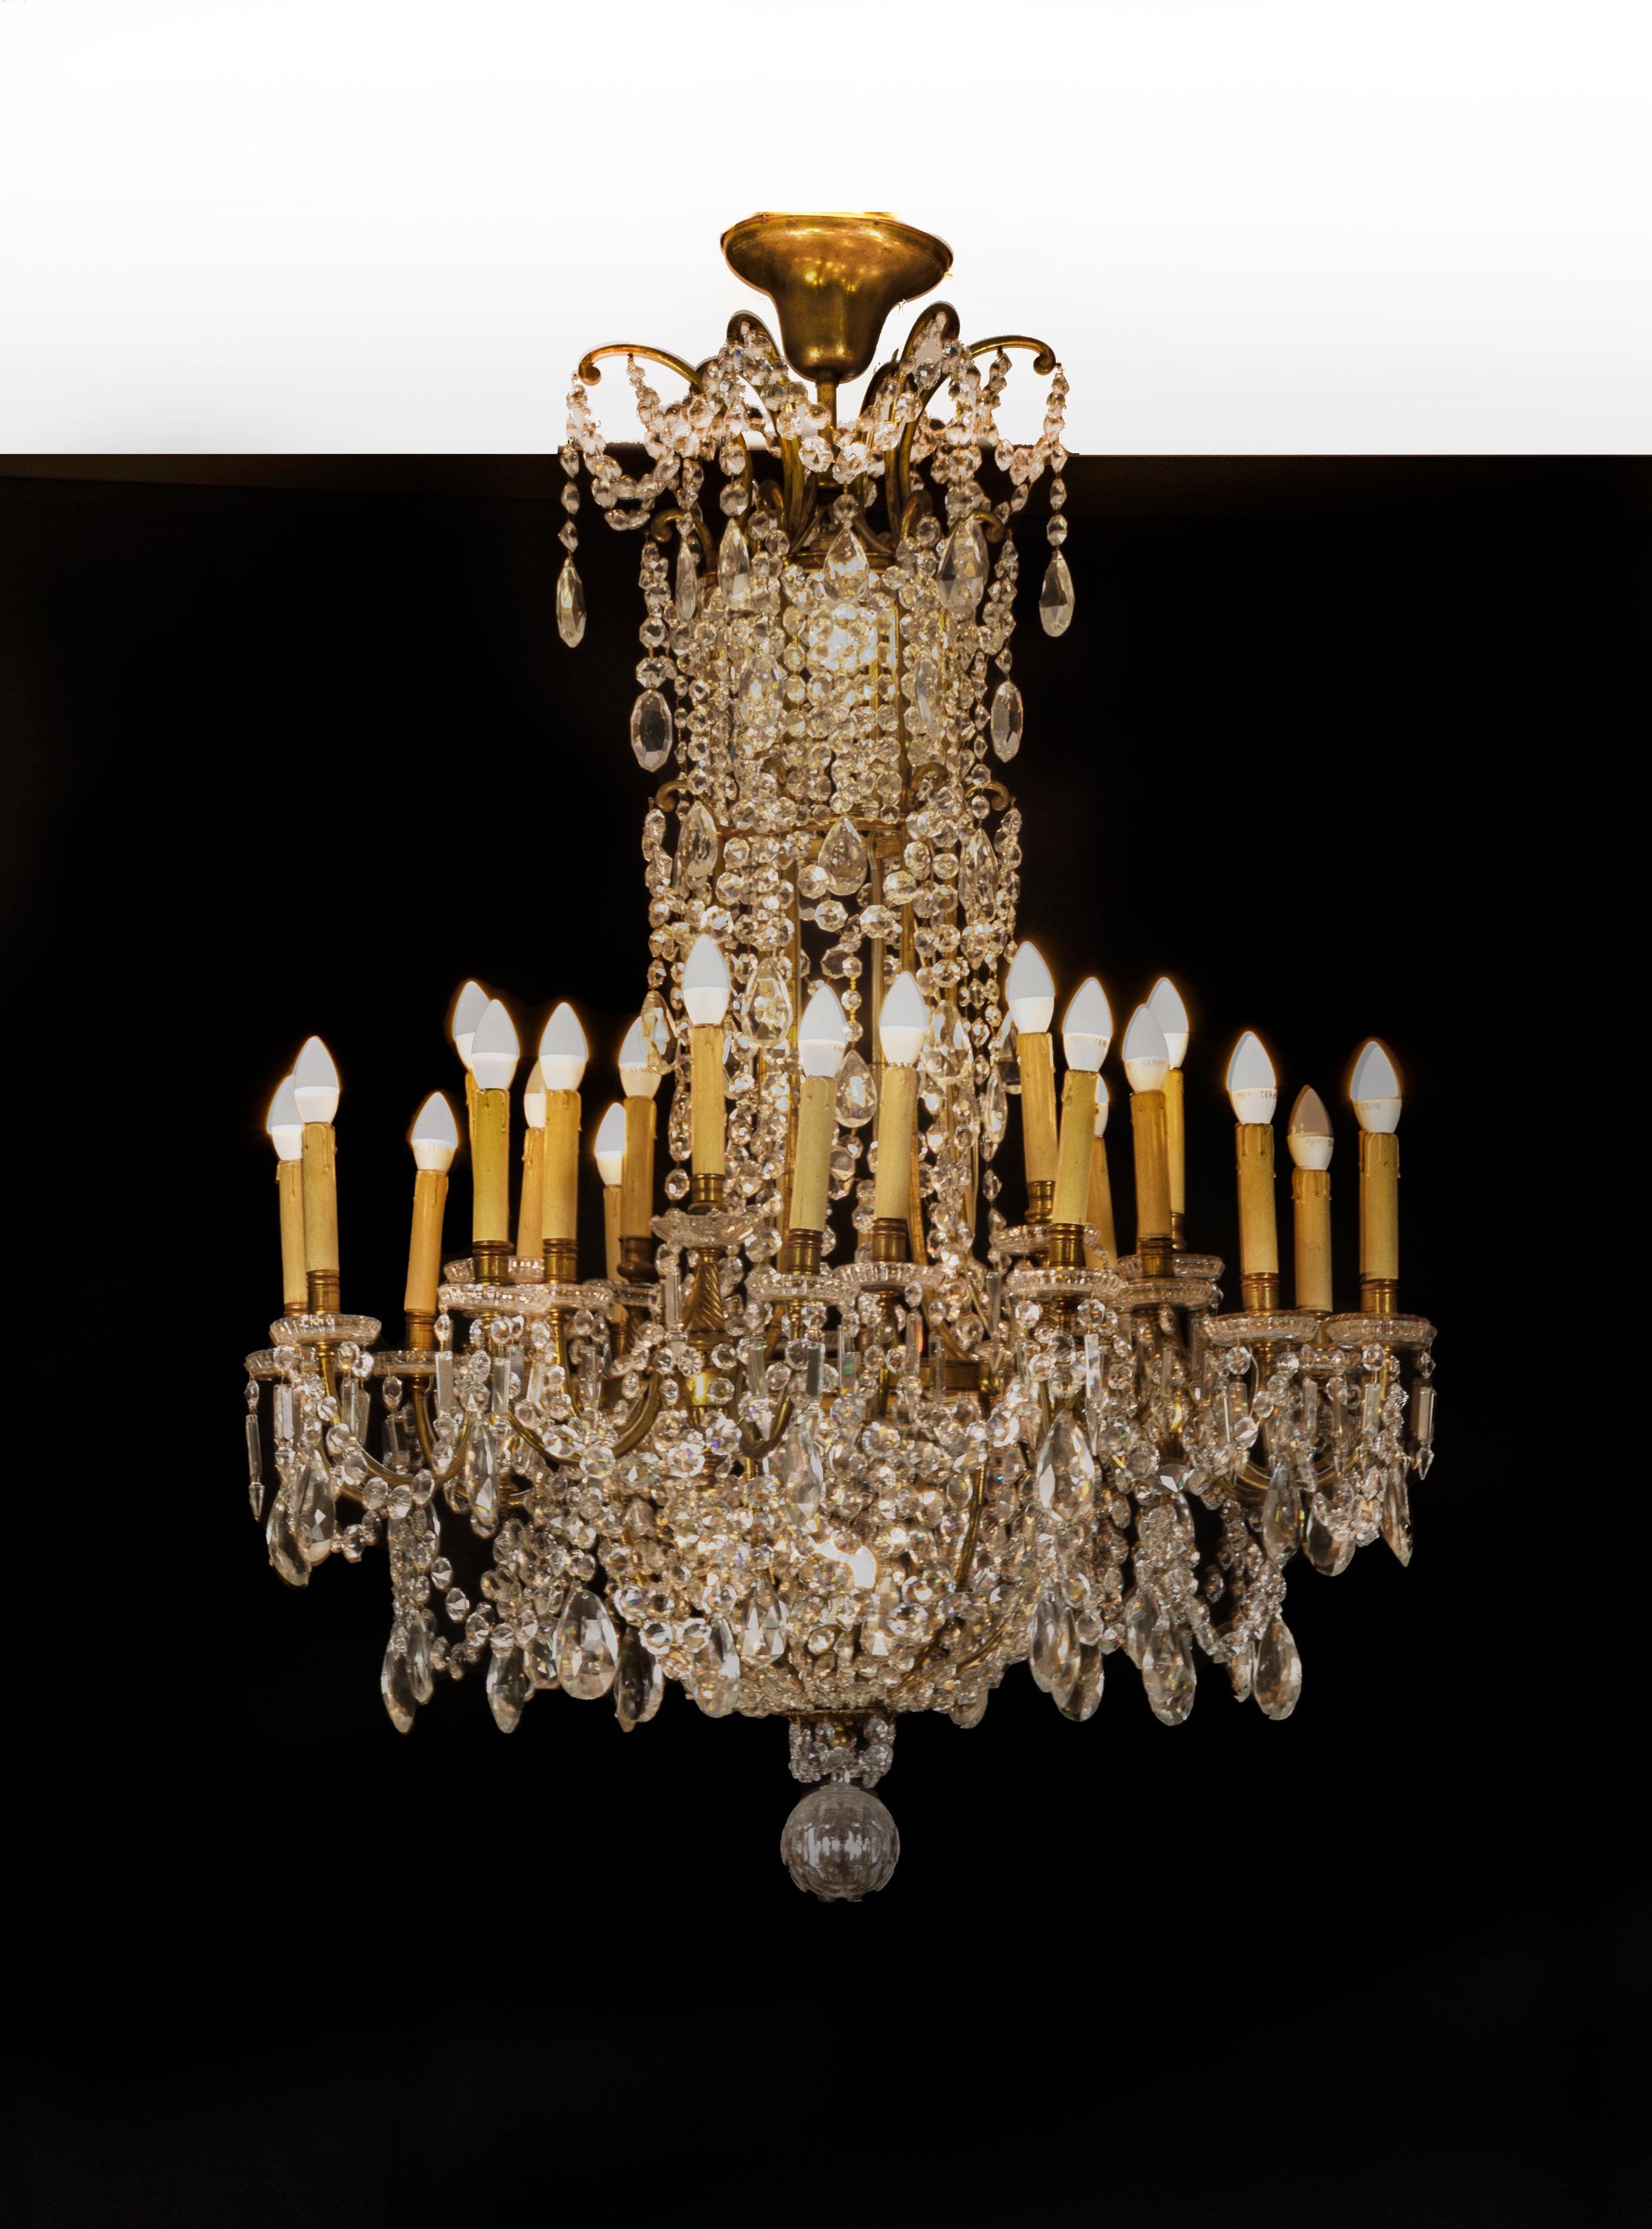 This Baccarat crystal and doré bronze chandelier of monumental size and opulent design is truly a splendid sight boasting 24 lights, distinguished by the oversized drops of crystals, which hang among garlands of luminous prisms from the doré bronze